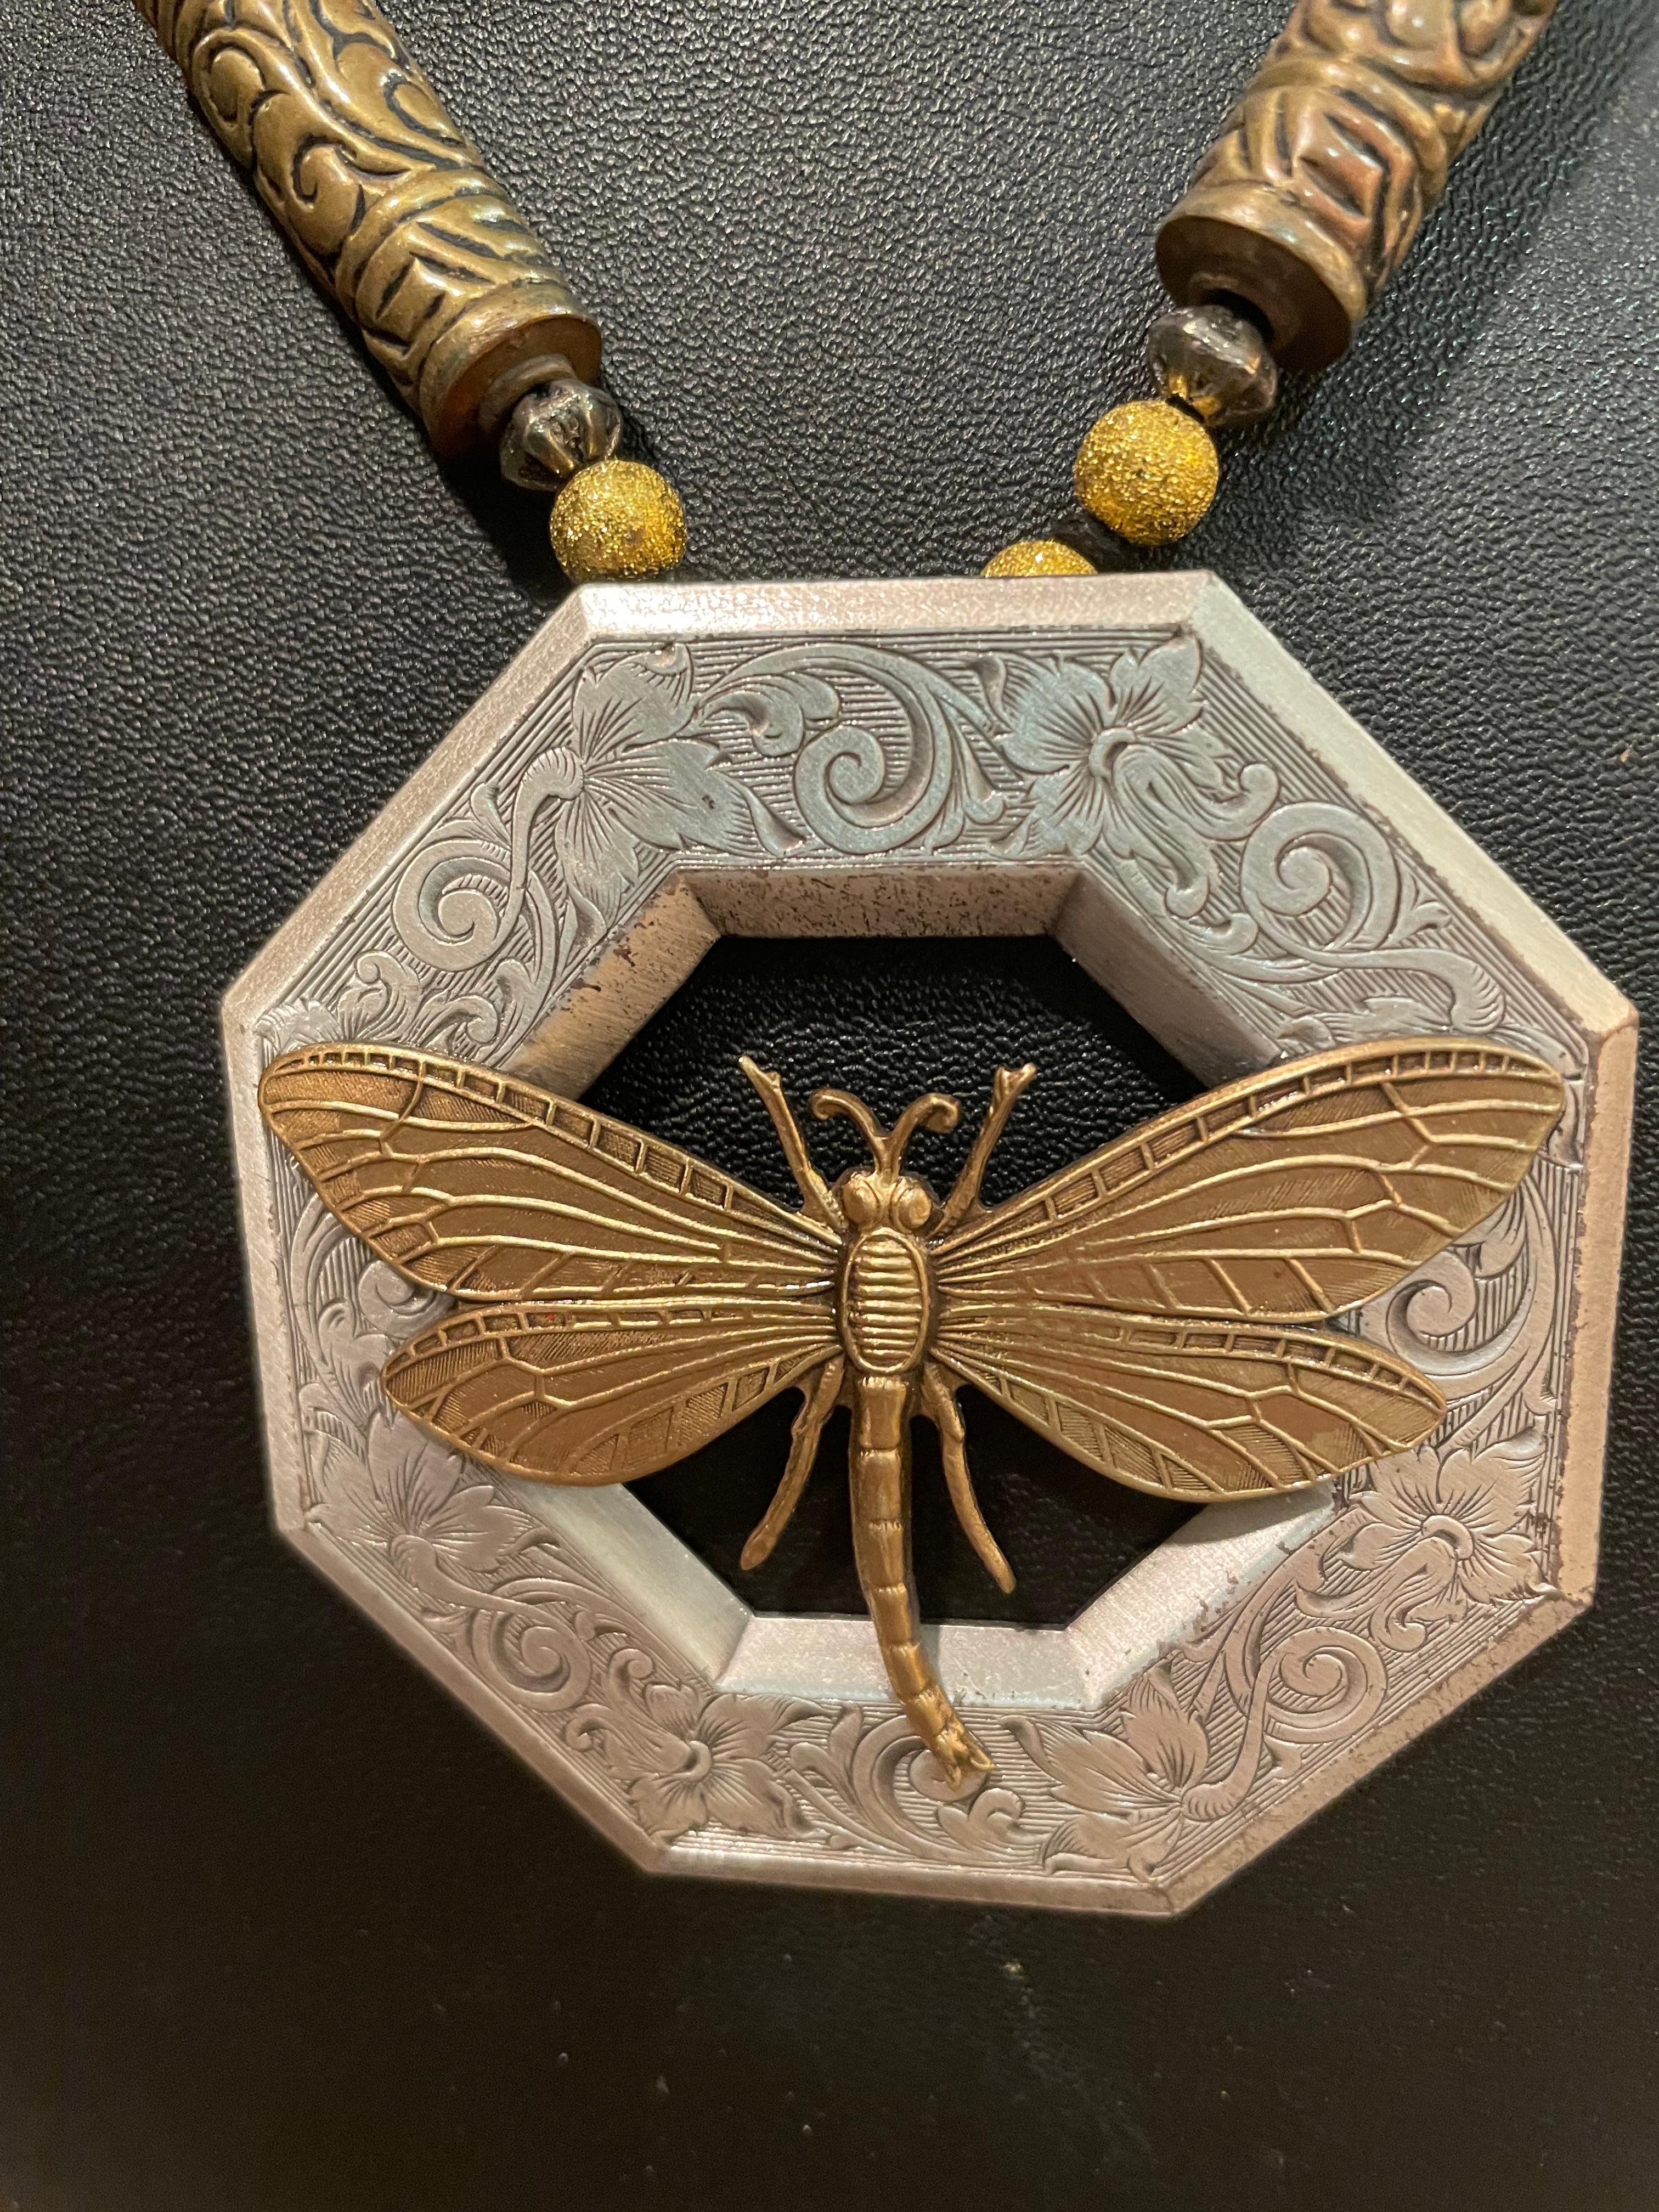 LB has on offer a stunning, one of a kind, handmade Antique buckle necklace. A lovely silver dragonfly is centered on the antique Brass buckle and antique silver and brass beads enhance this fabulous piece.
This piece is an outstanding addition to